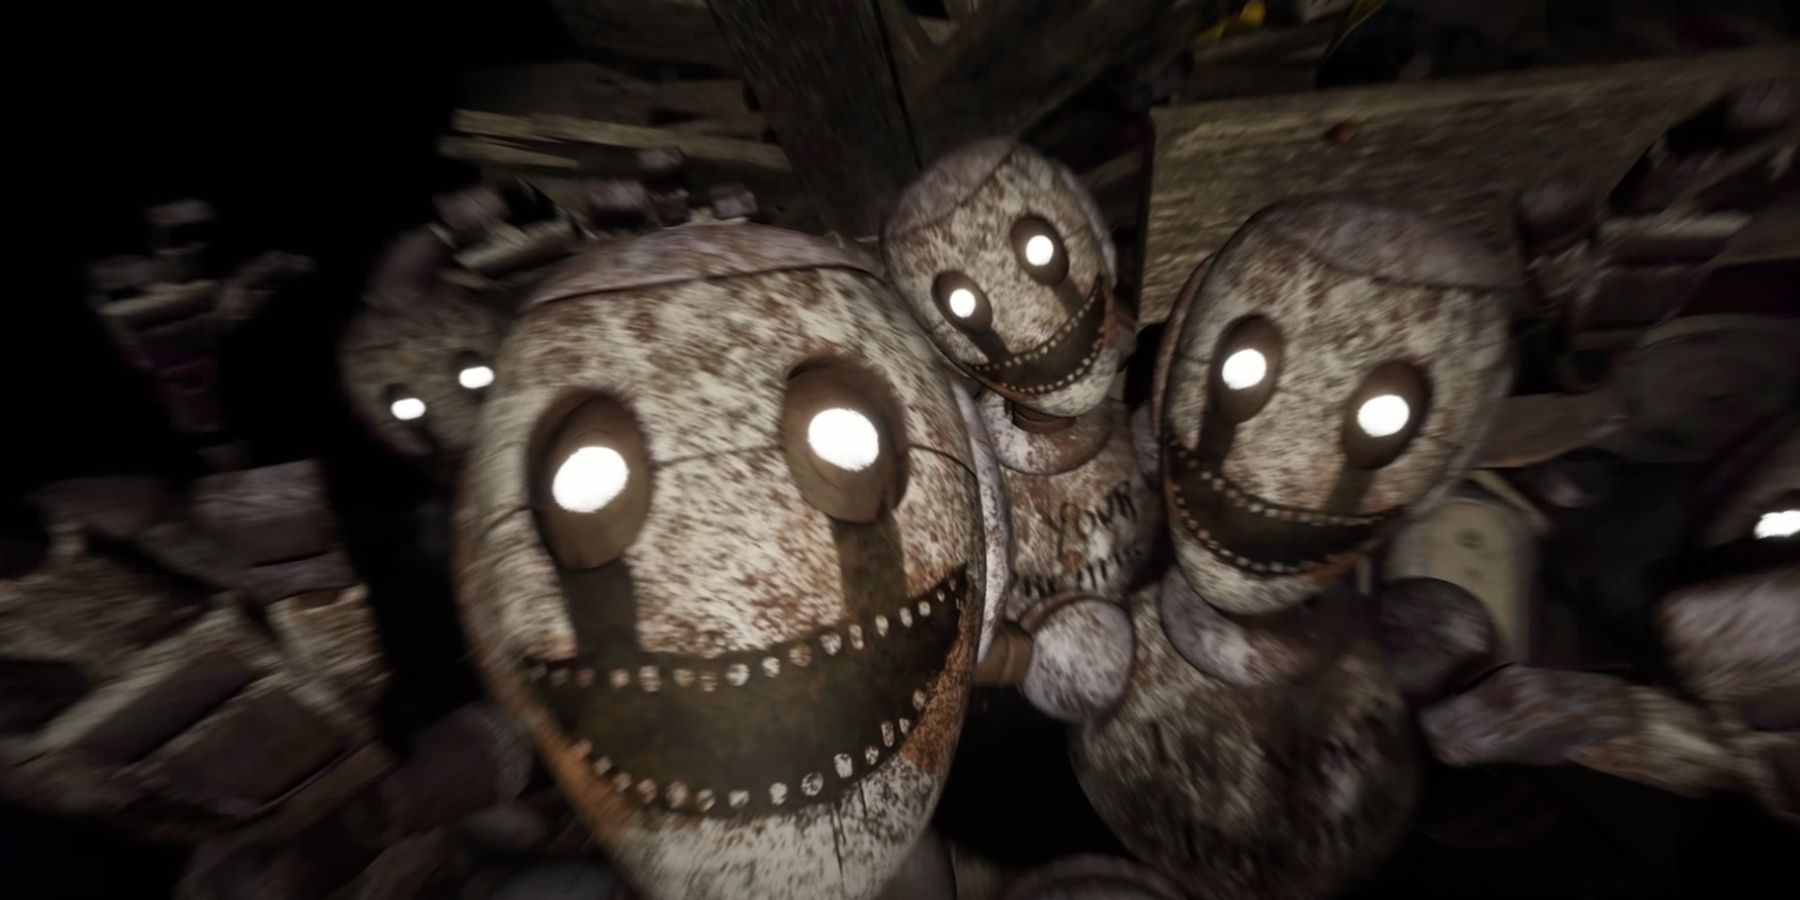 Five Nights At Freddy's: Security Breach Is Coming December 16